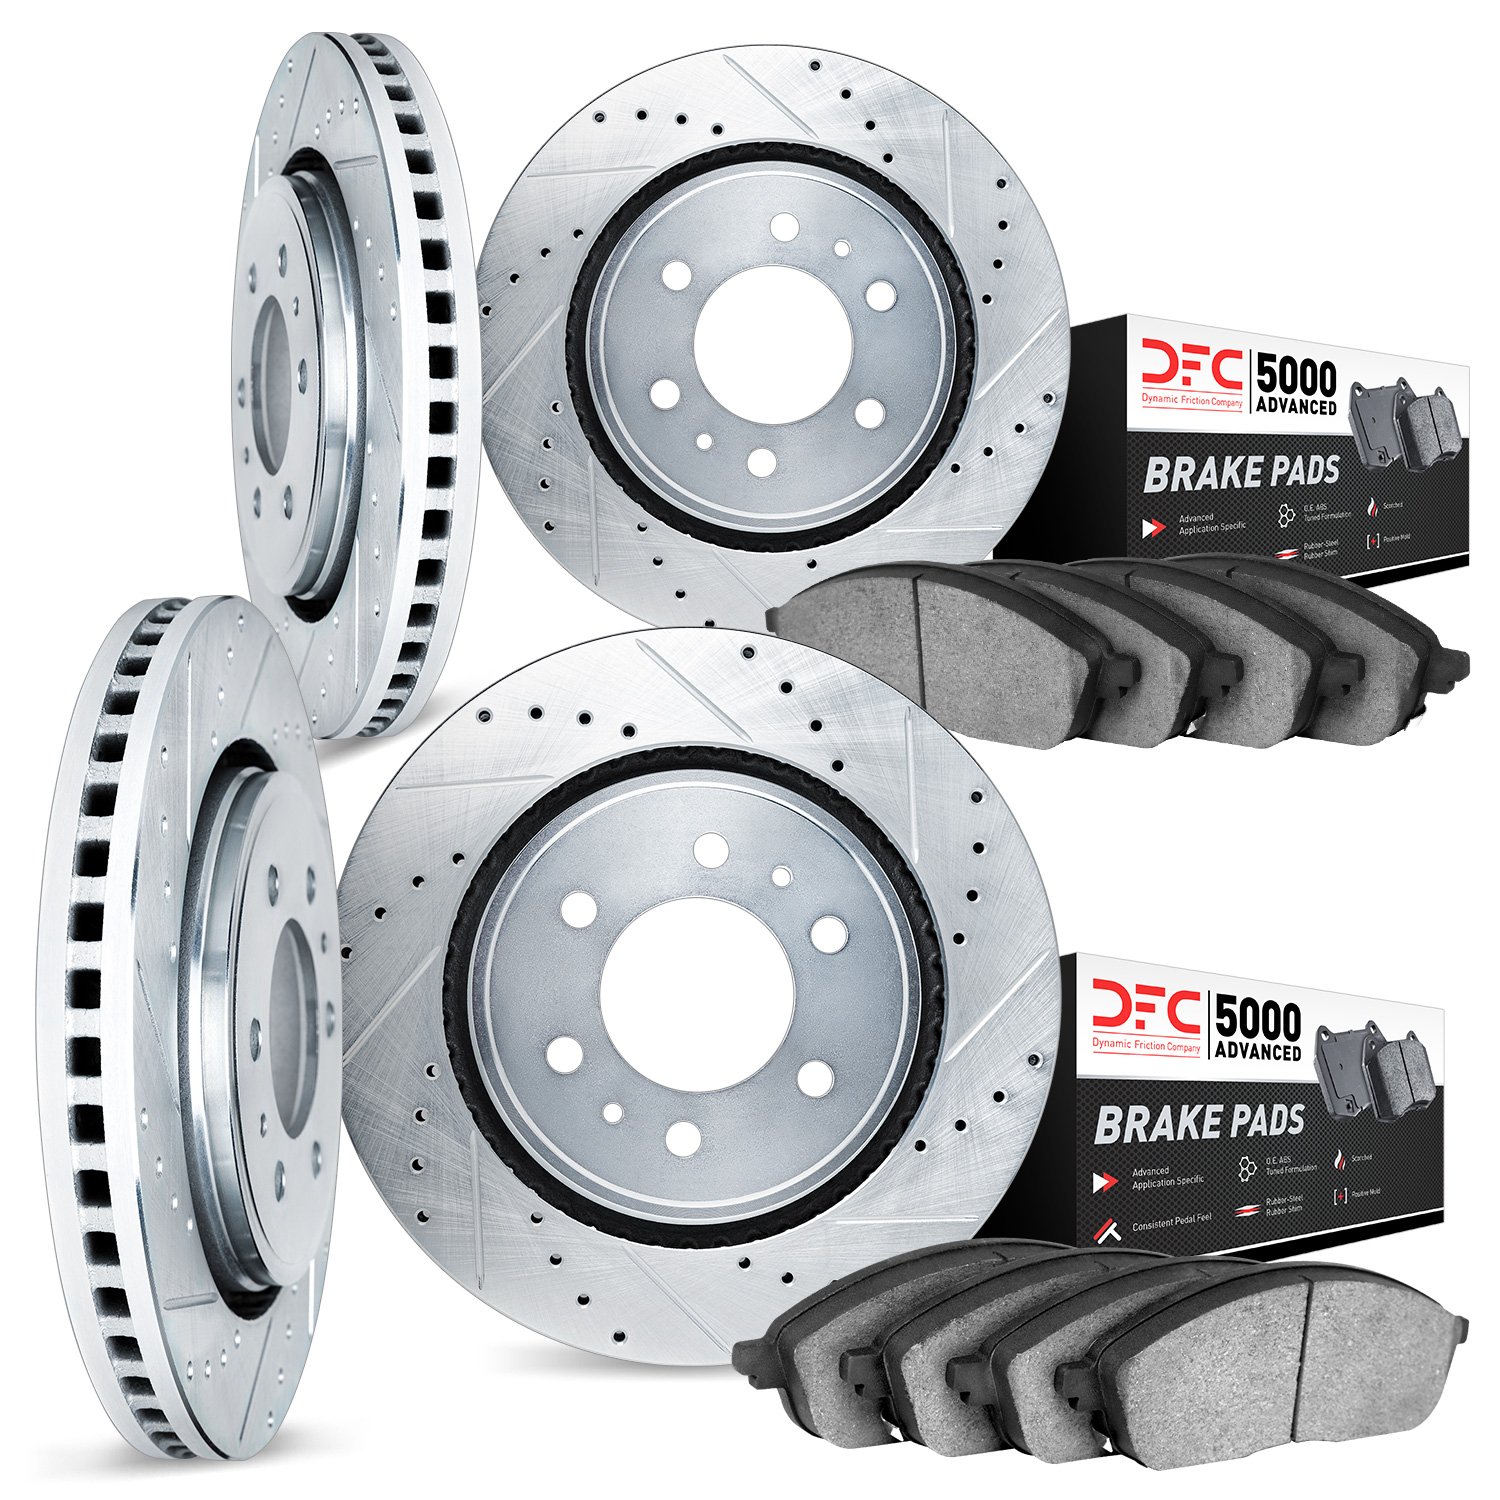 7504-48038 Drilled/Slotted Brake Rotors w/5000 Advanced Brake Pads Kit [Silver], 2017-2020 GM, Position: Front and Rear